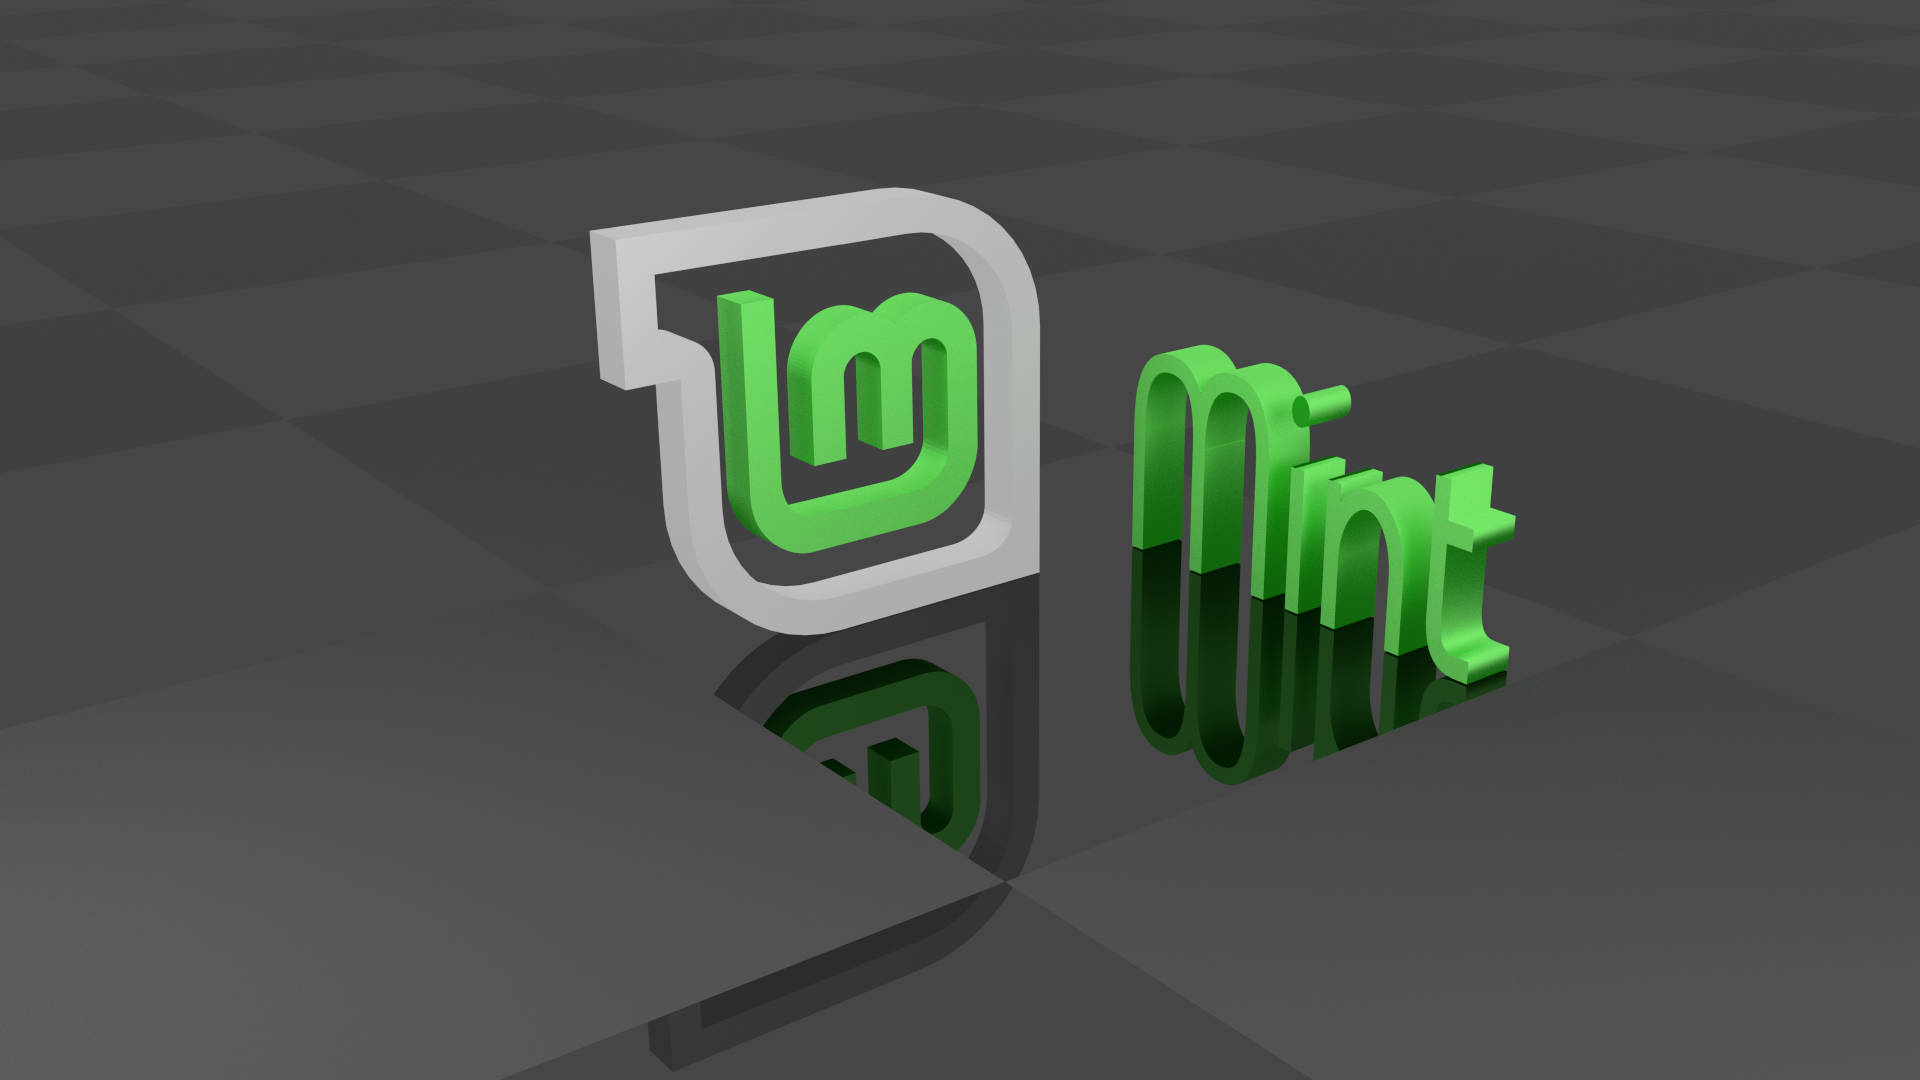 The 3d Logo Of The Linux Mint Operating System Displayed On Graphical Tiles.